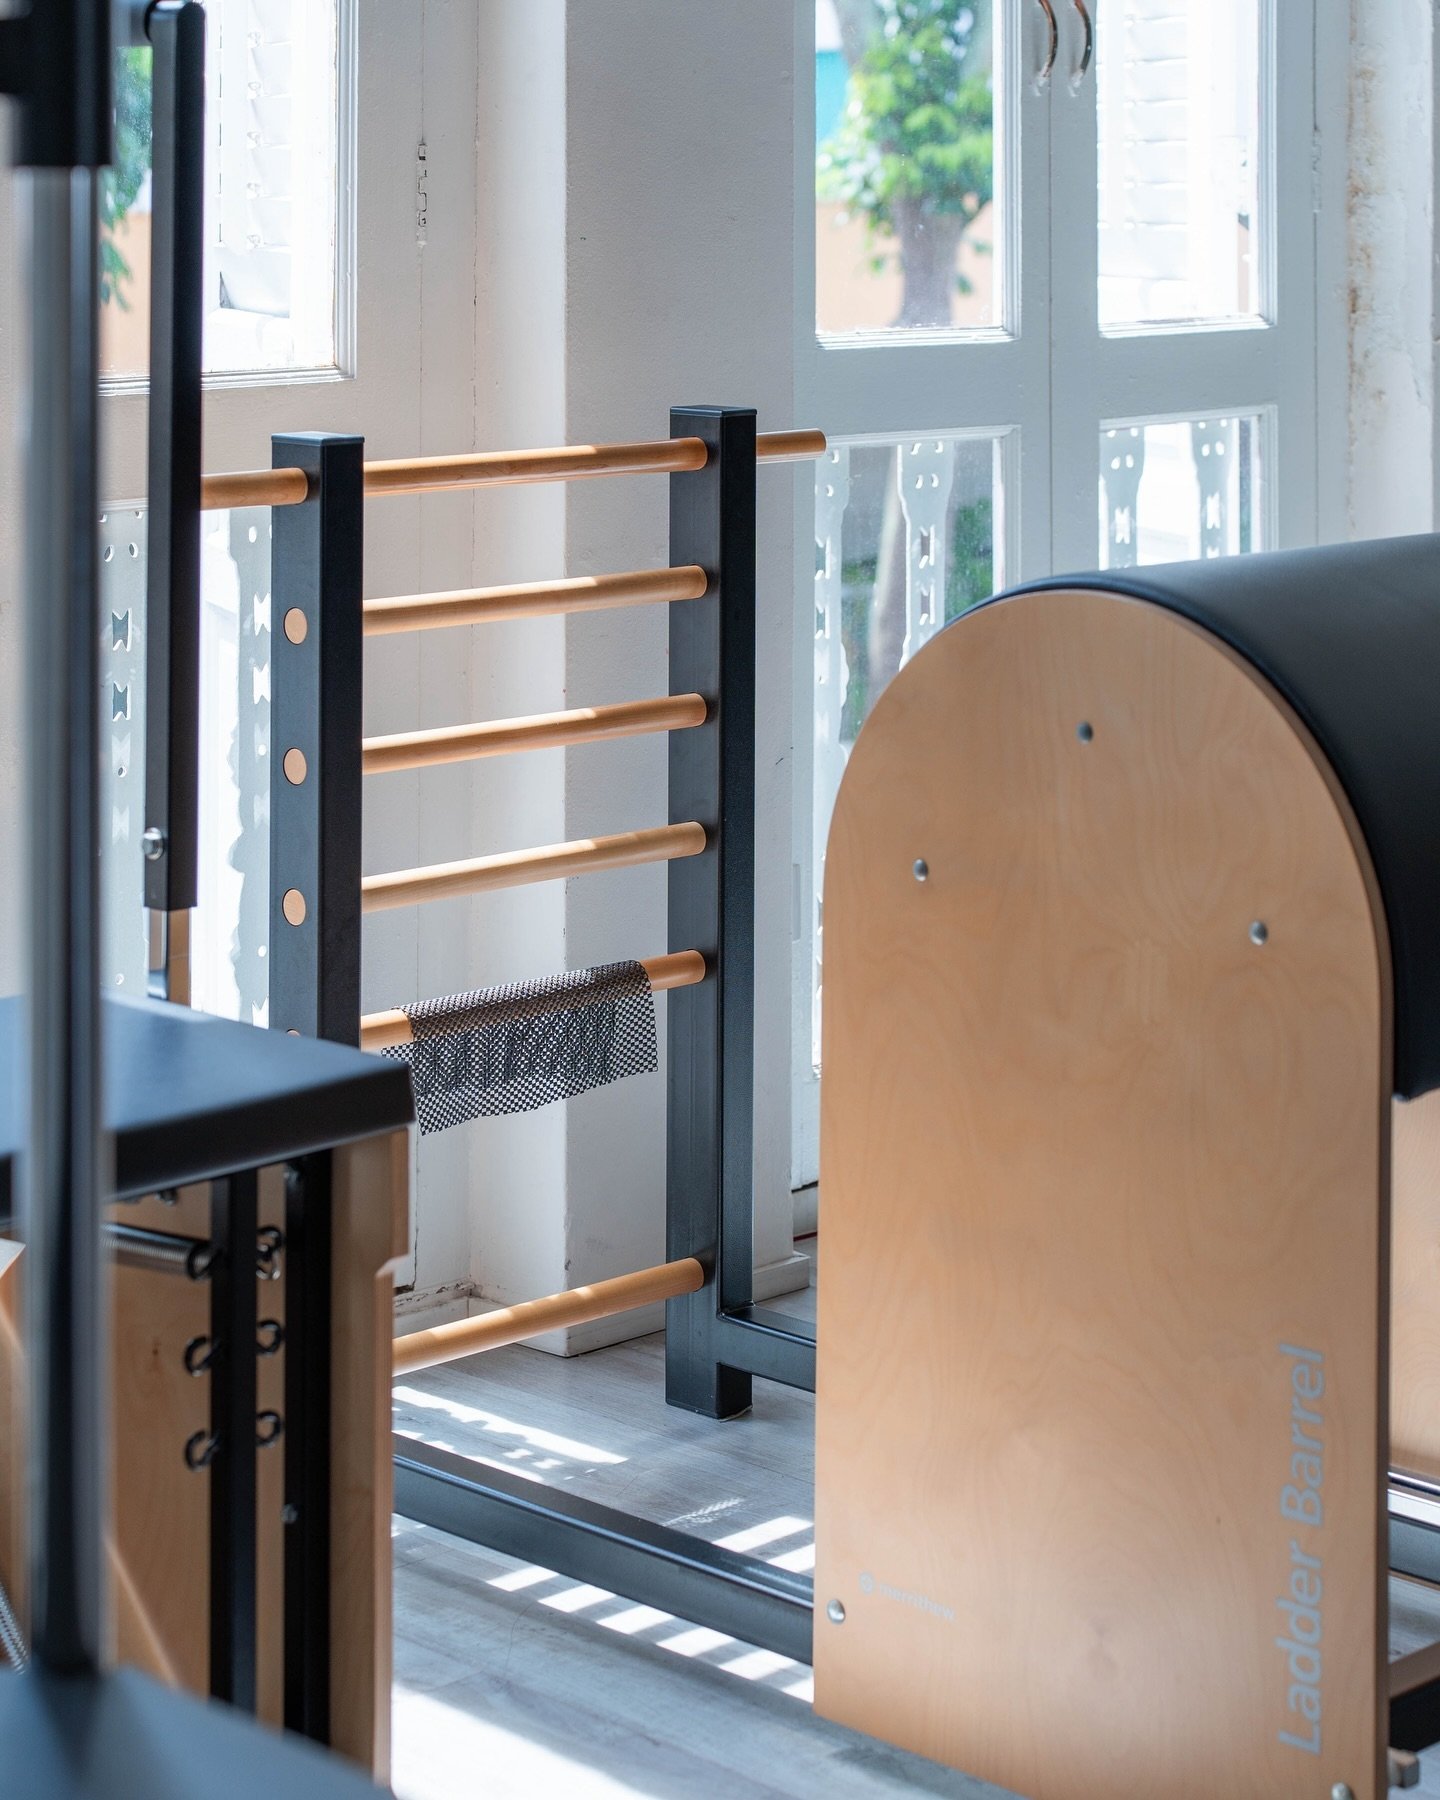 Discover the understated complexities of the Ladder Barrel. Despite its straightforward design, mastering each movement demands meticulous control and heightened awareness. Build your core and enhance flexibility while deepening your Pilates practice